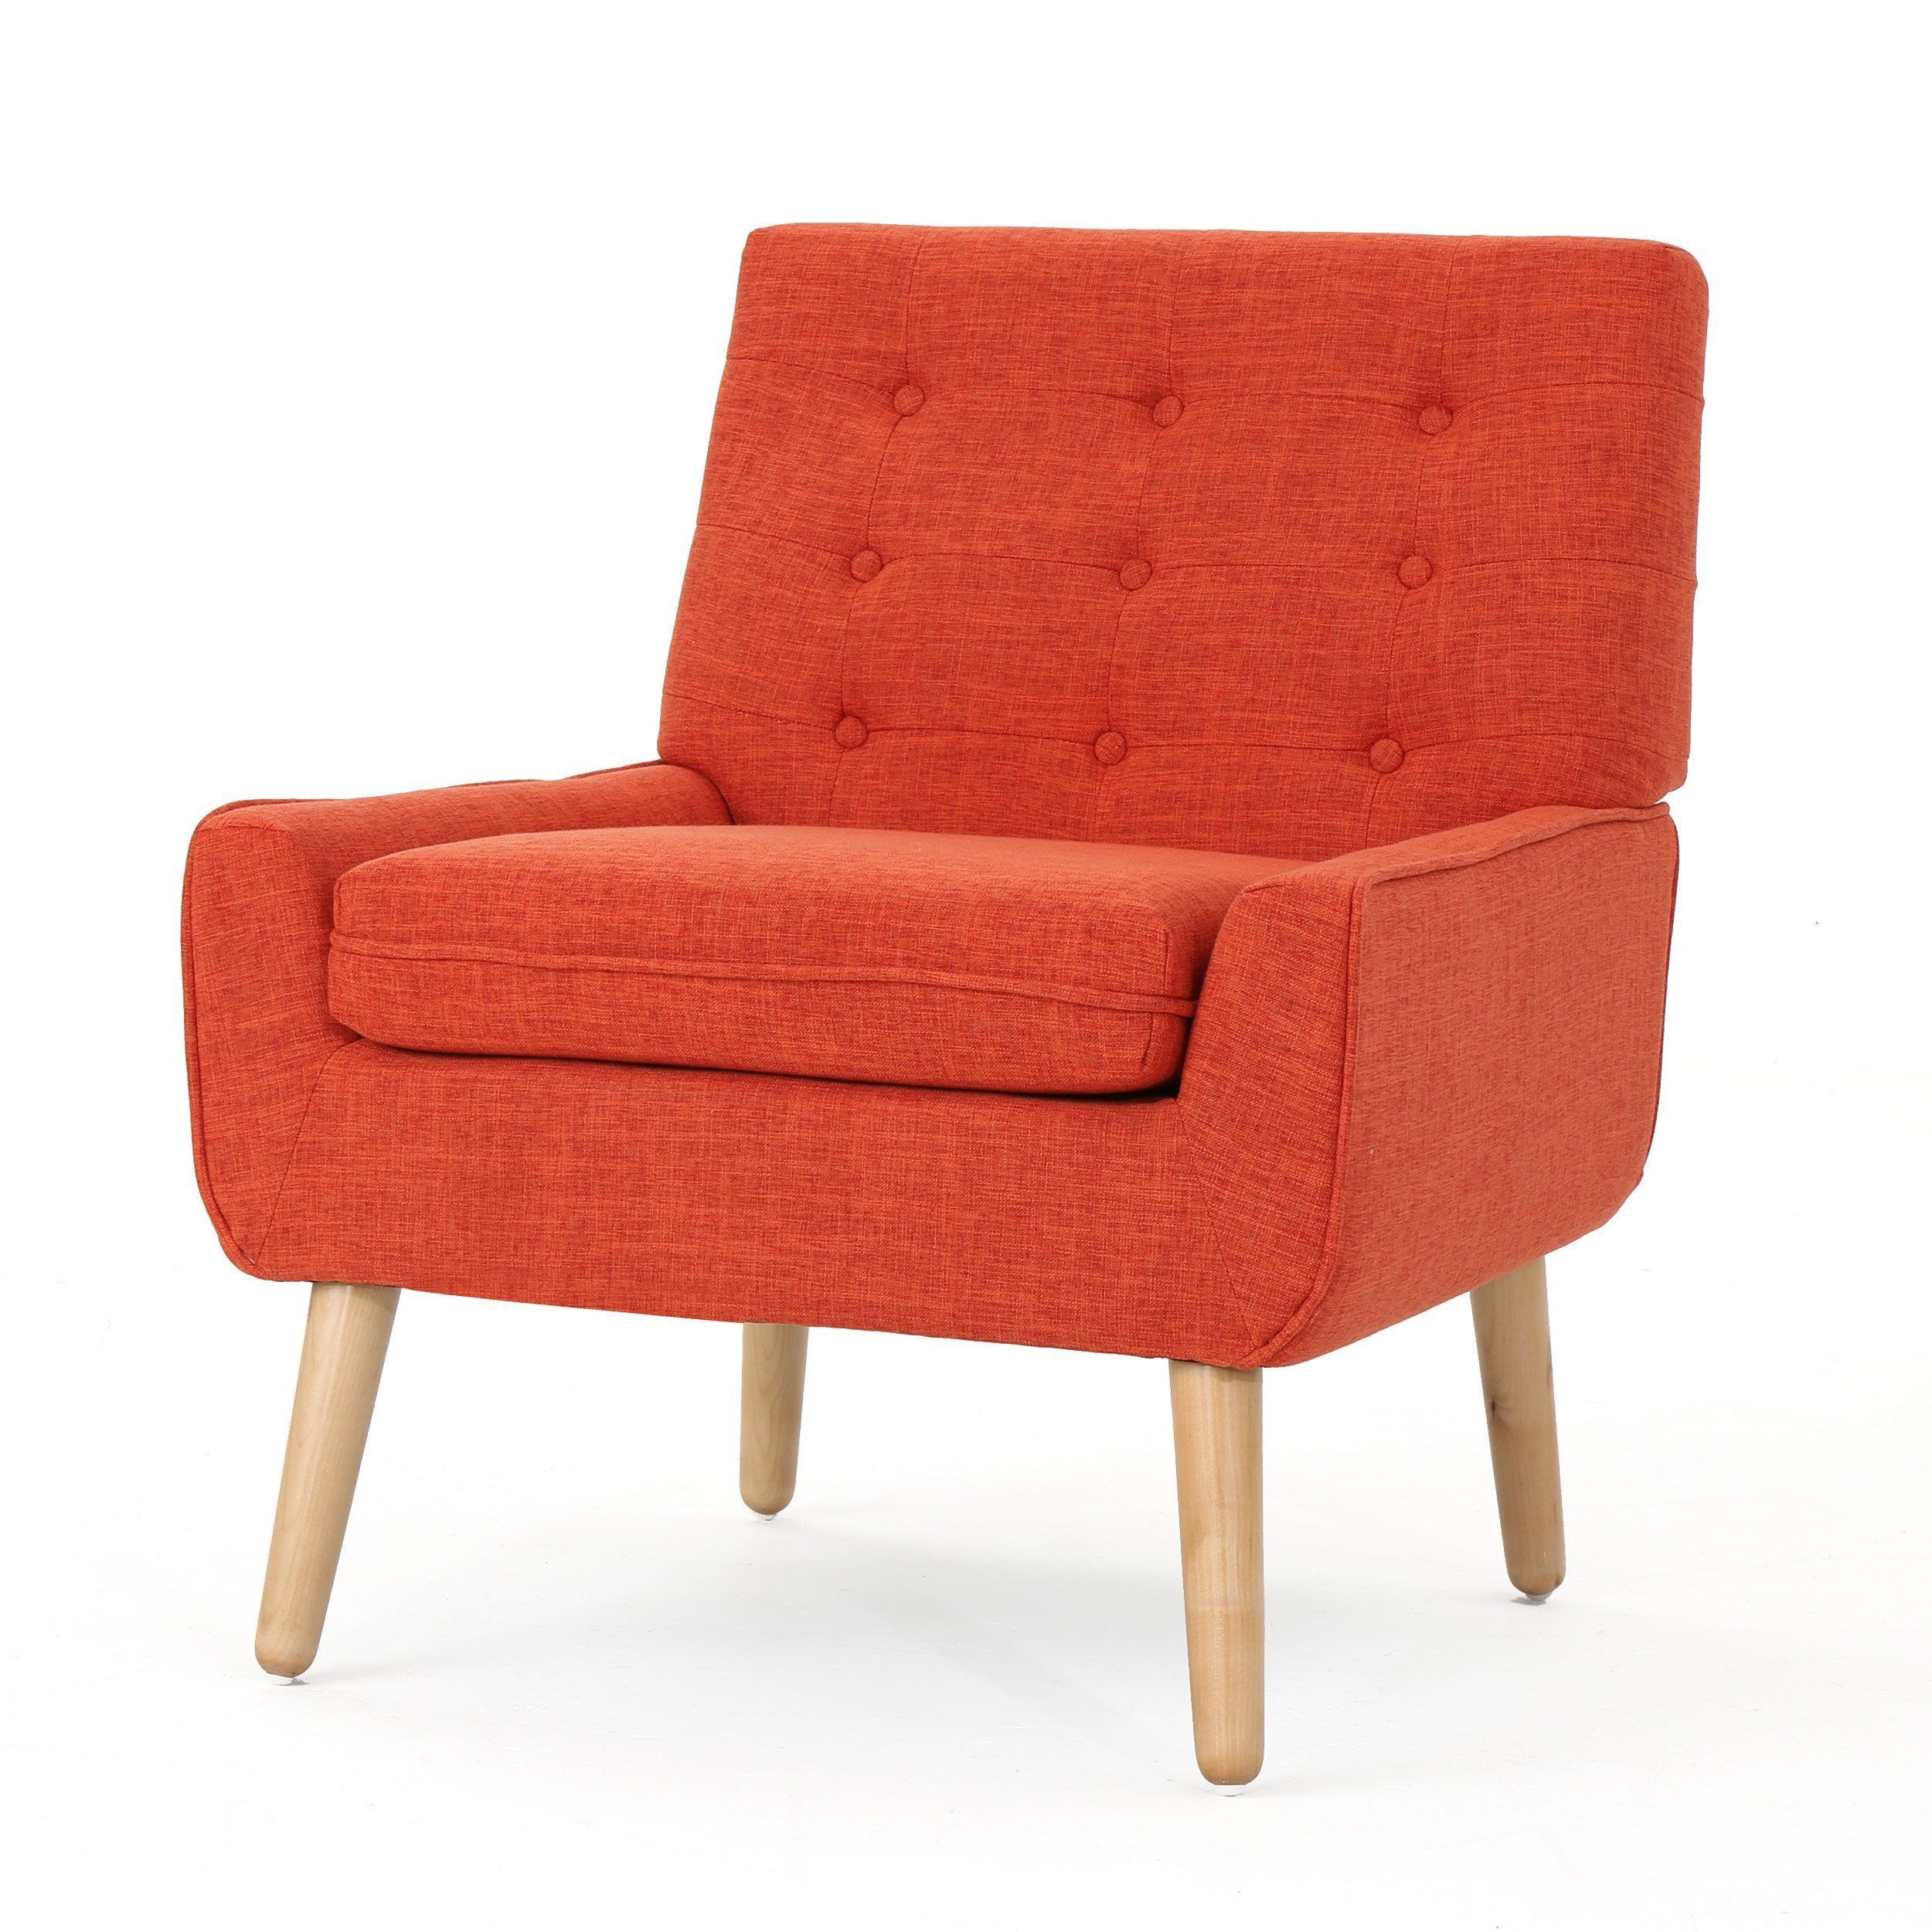 Eonna Mid Century Modern Button Tufted Fabric Upholstered Accent Chair With Regard To Orange Fabric Nail Button Square Ottomans (View 19 of 20)